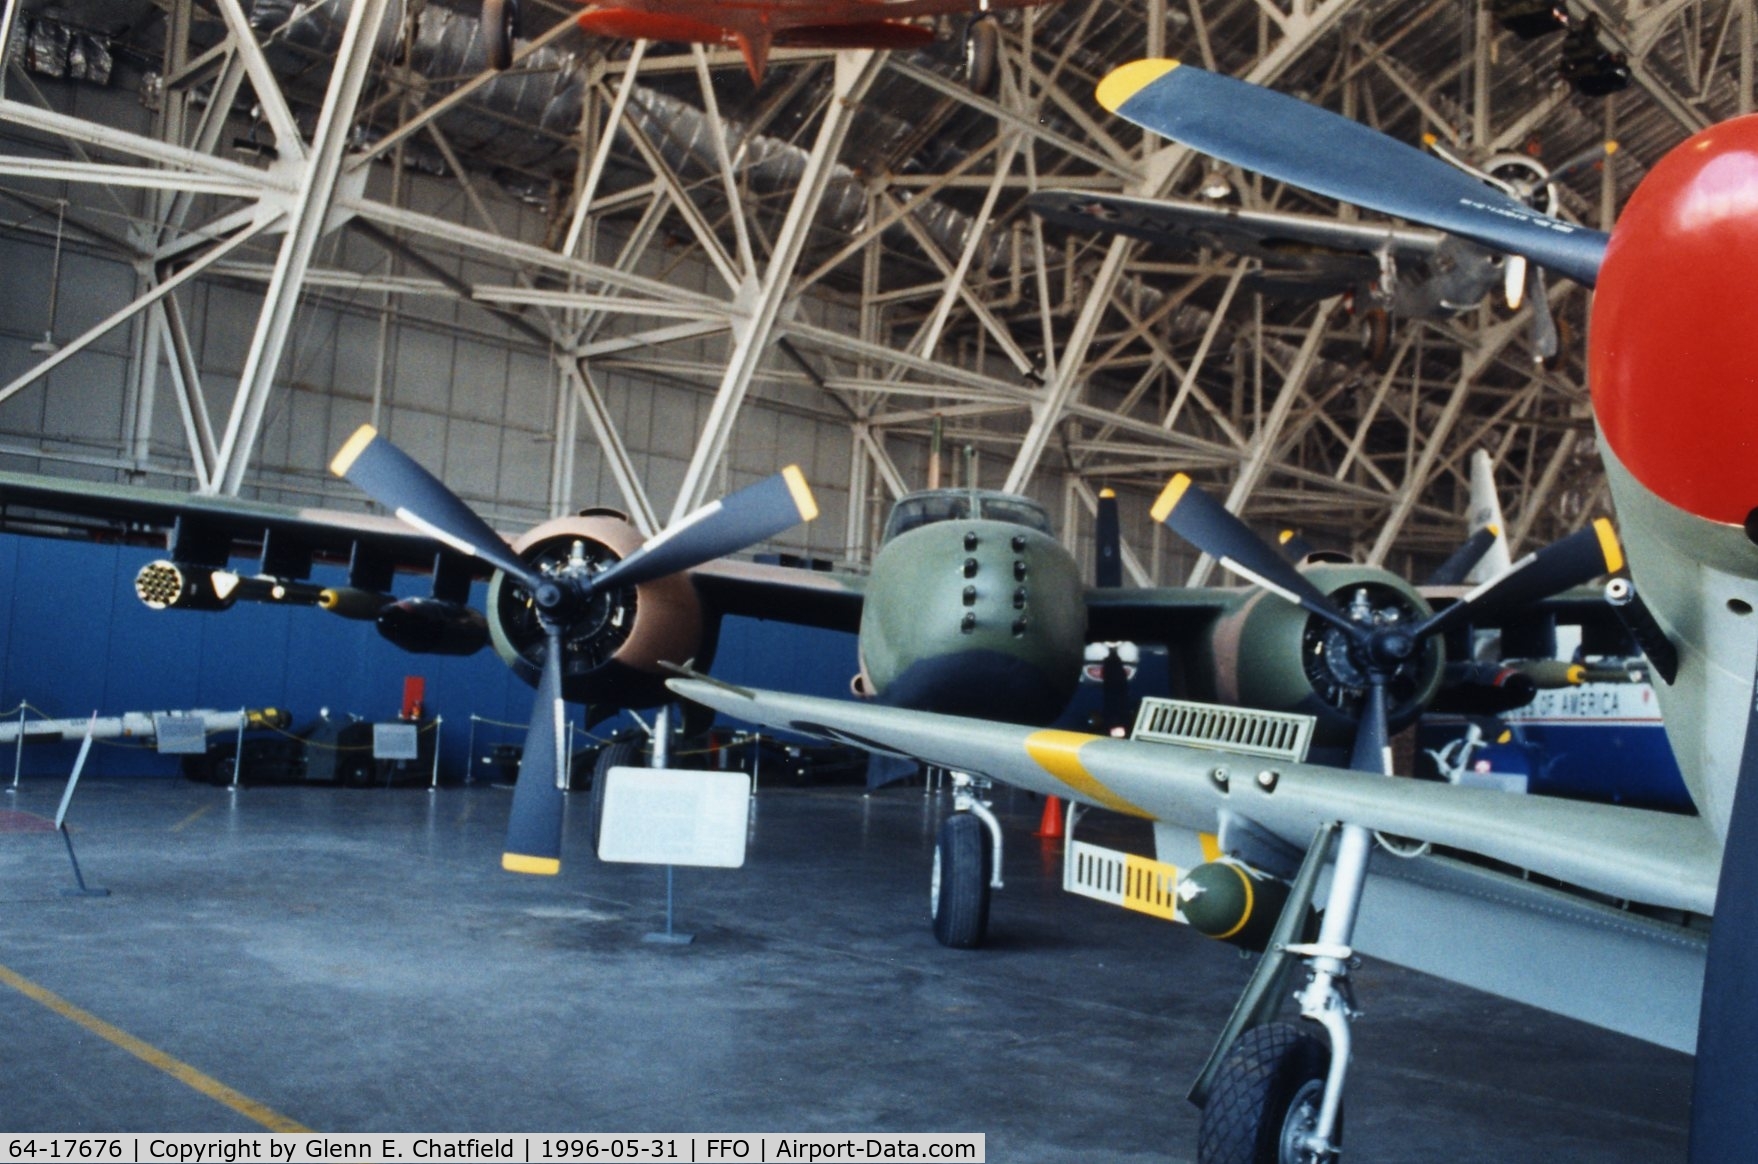 64-17676, 1971 Douglas-On Mark B-26K Counter Invader C/N 7309 (was 41-39596), A-26K/B-26K at the National Museum of the U.S. Air Force